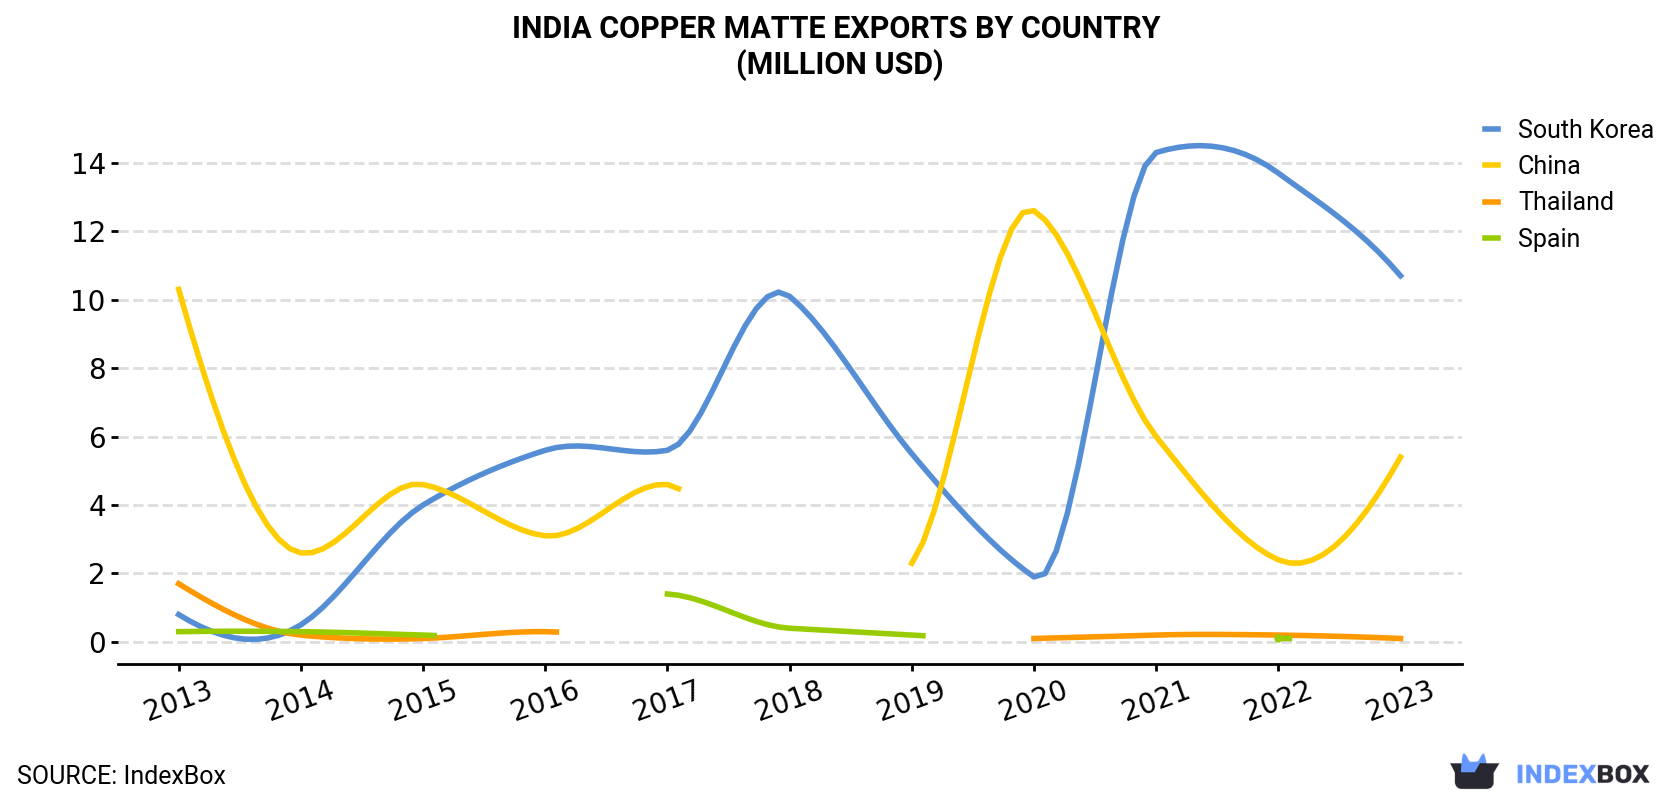 India Copper Matte Exports By Country (Million USD)